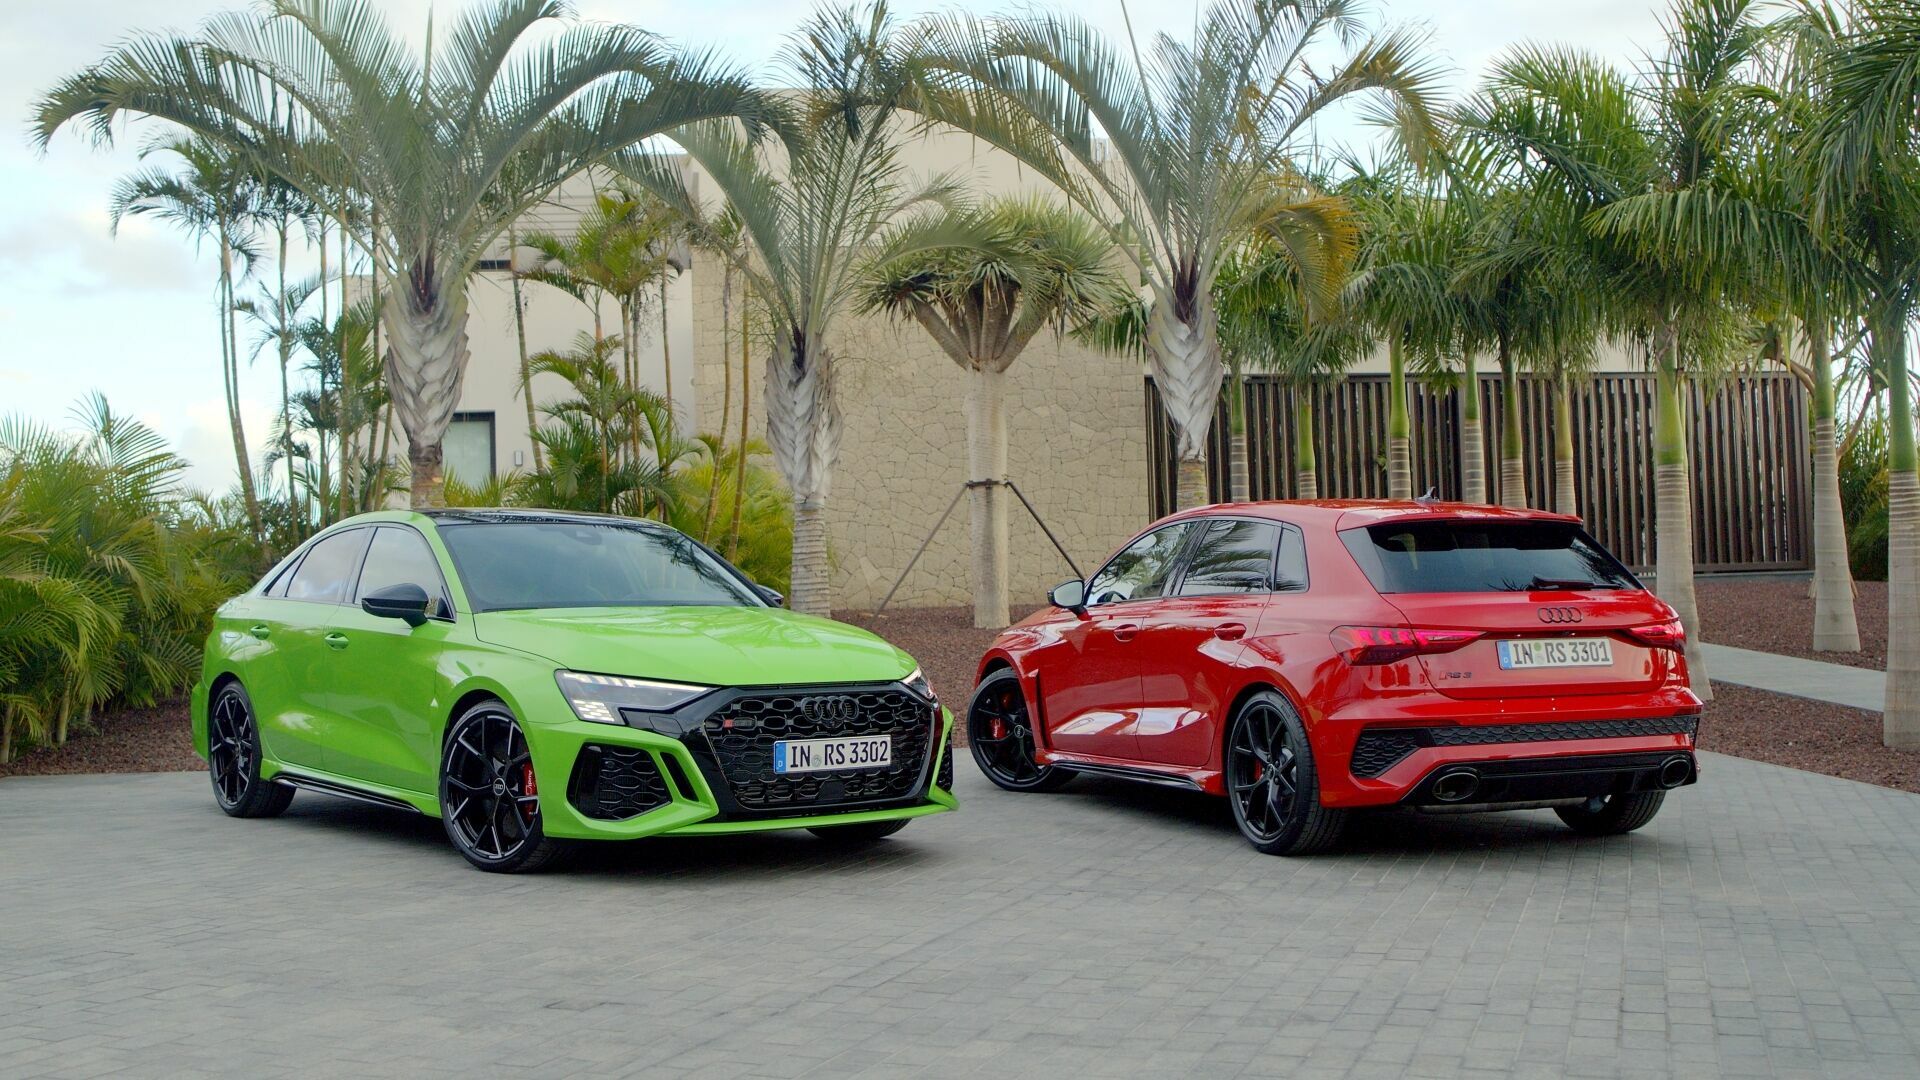 The new Audi RS 3: unmatched sportiness